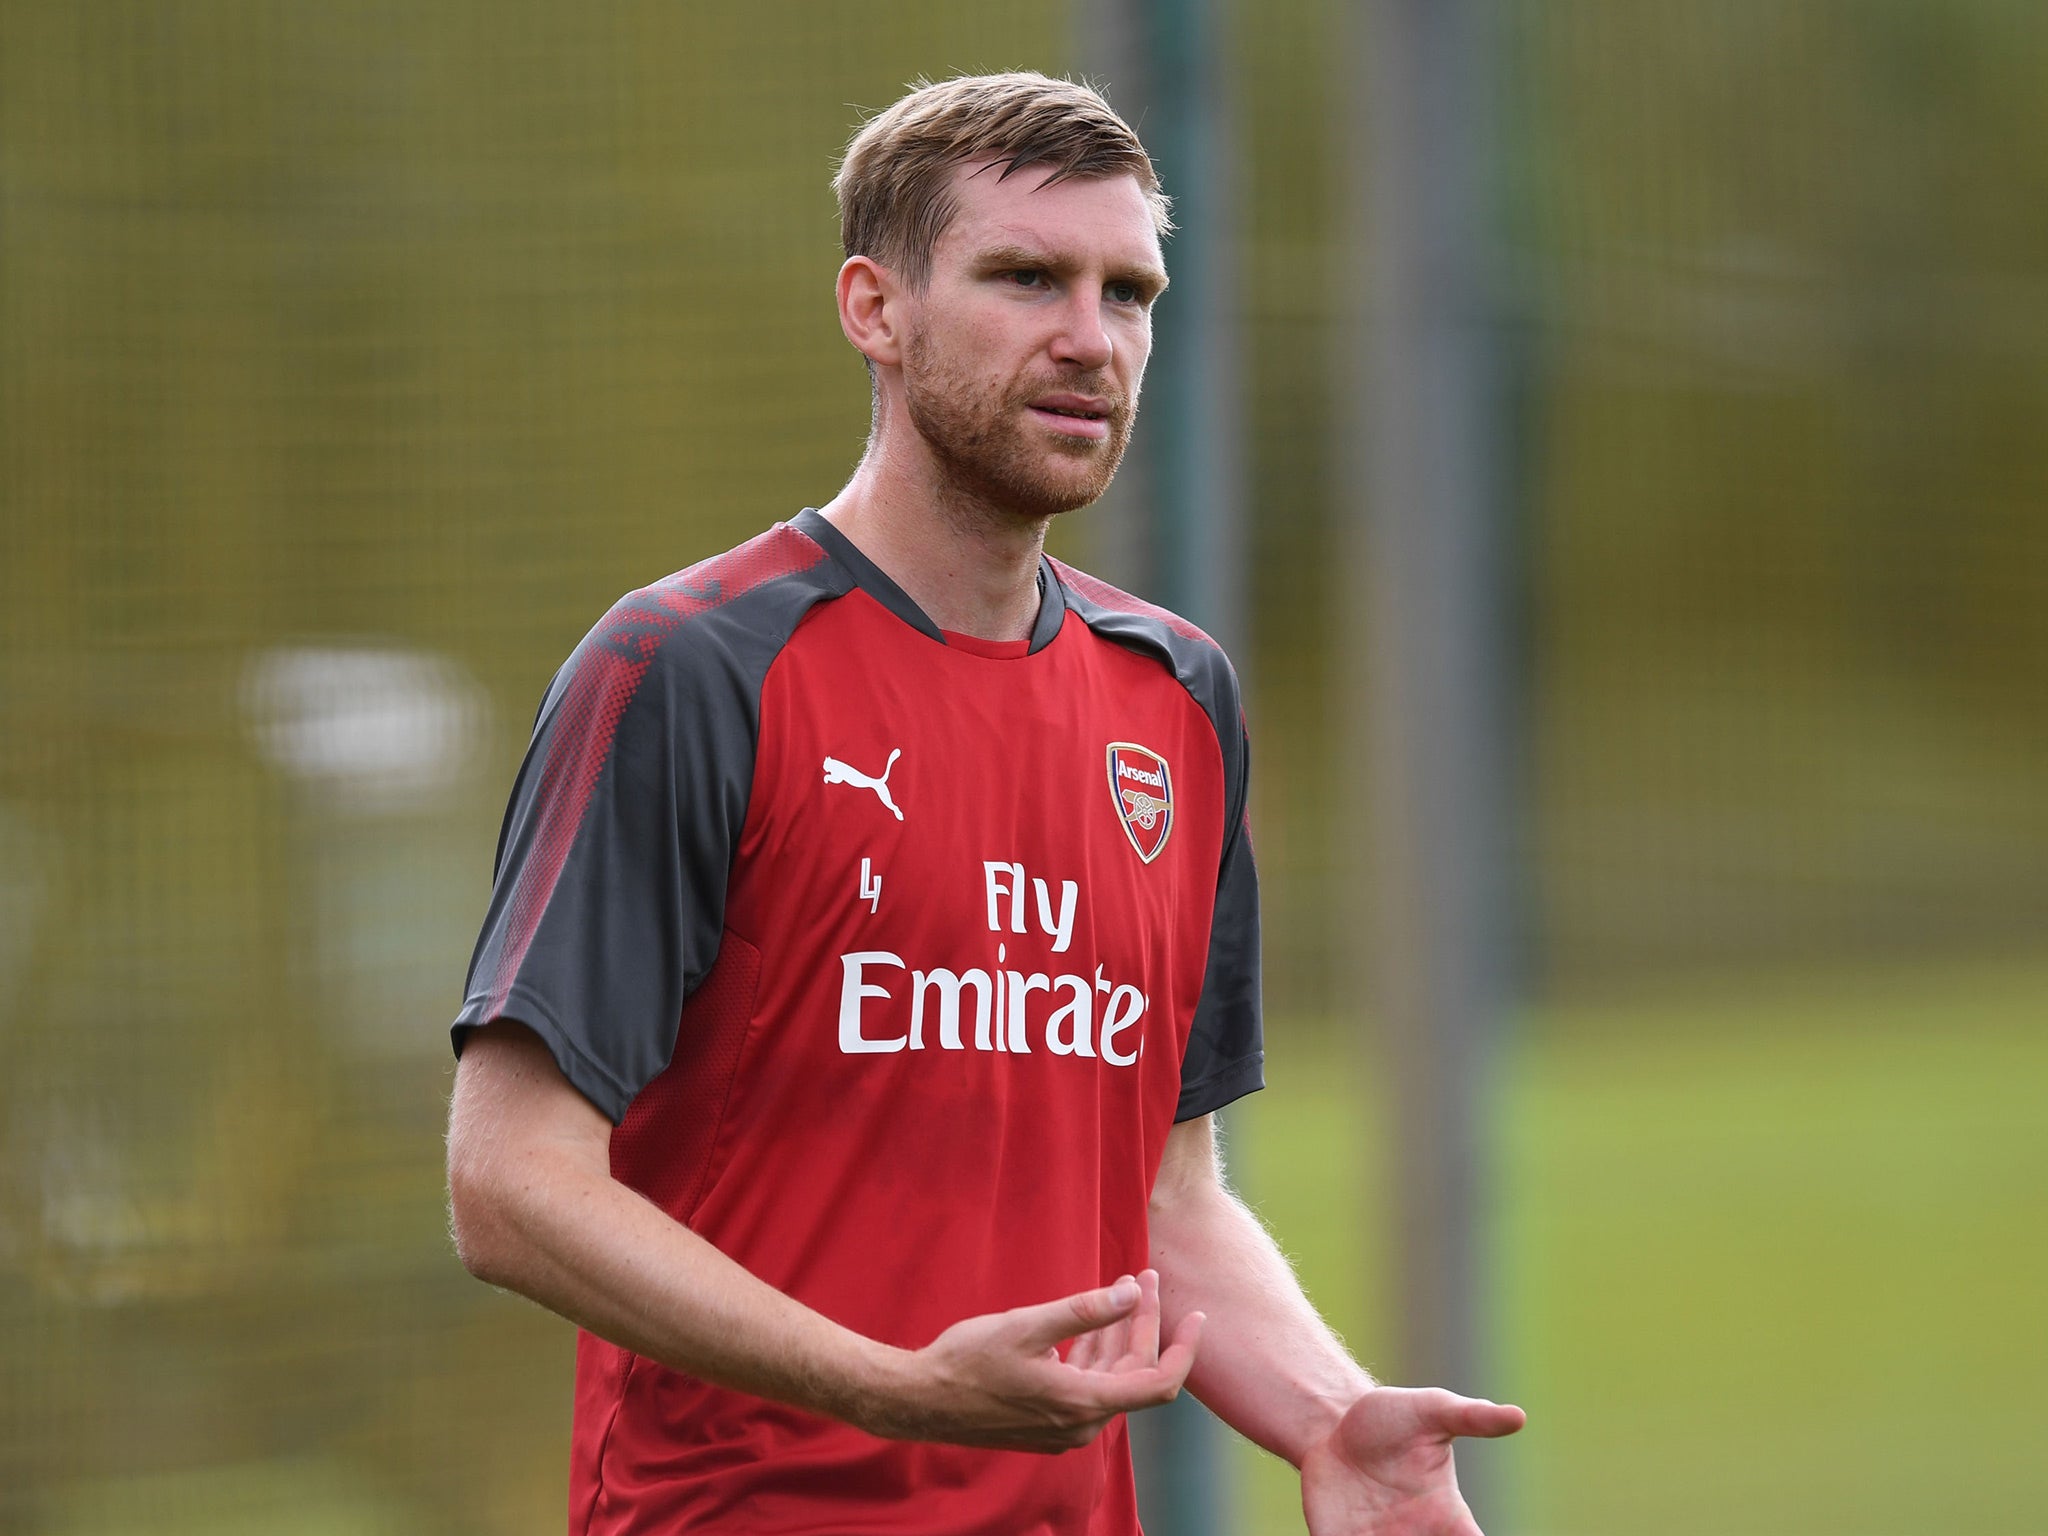 Per Mertesacker will end his playing career next year and join Arsenal's academy staff